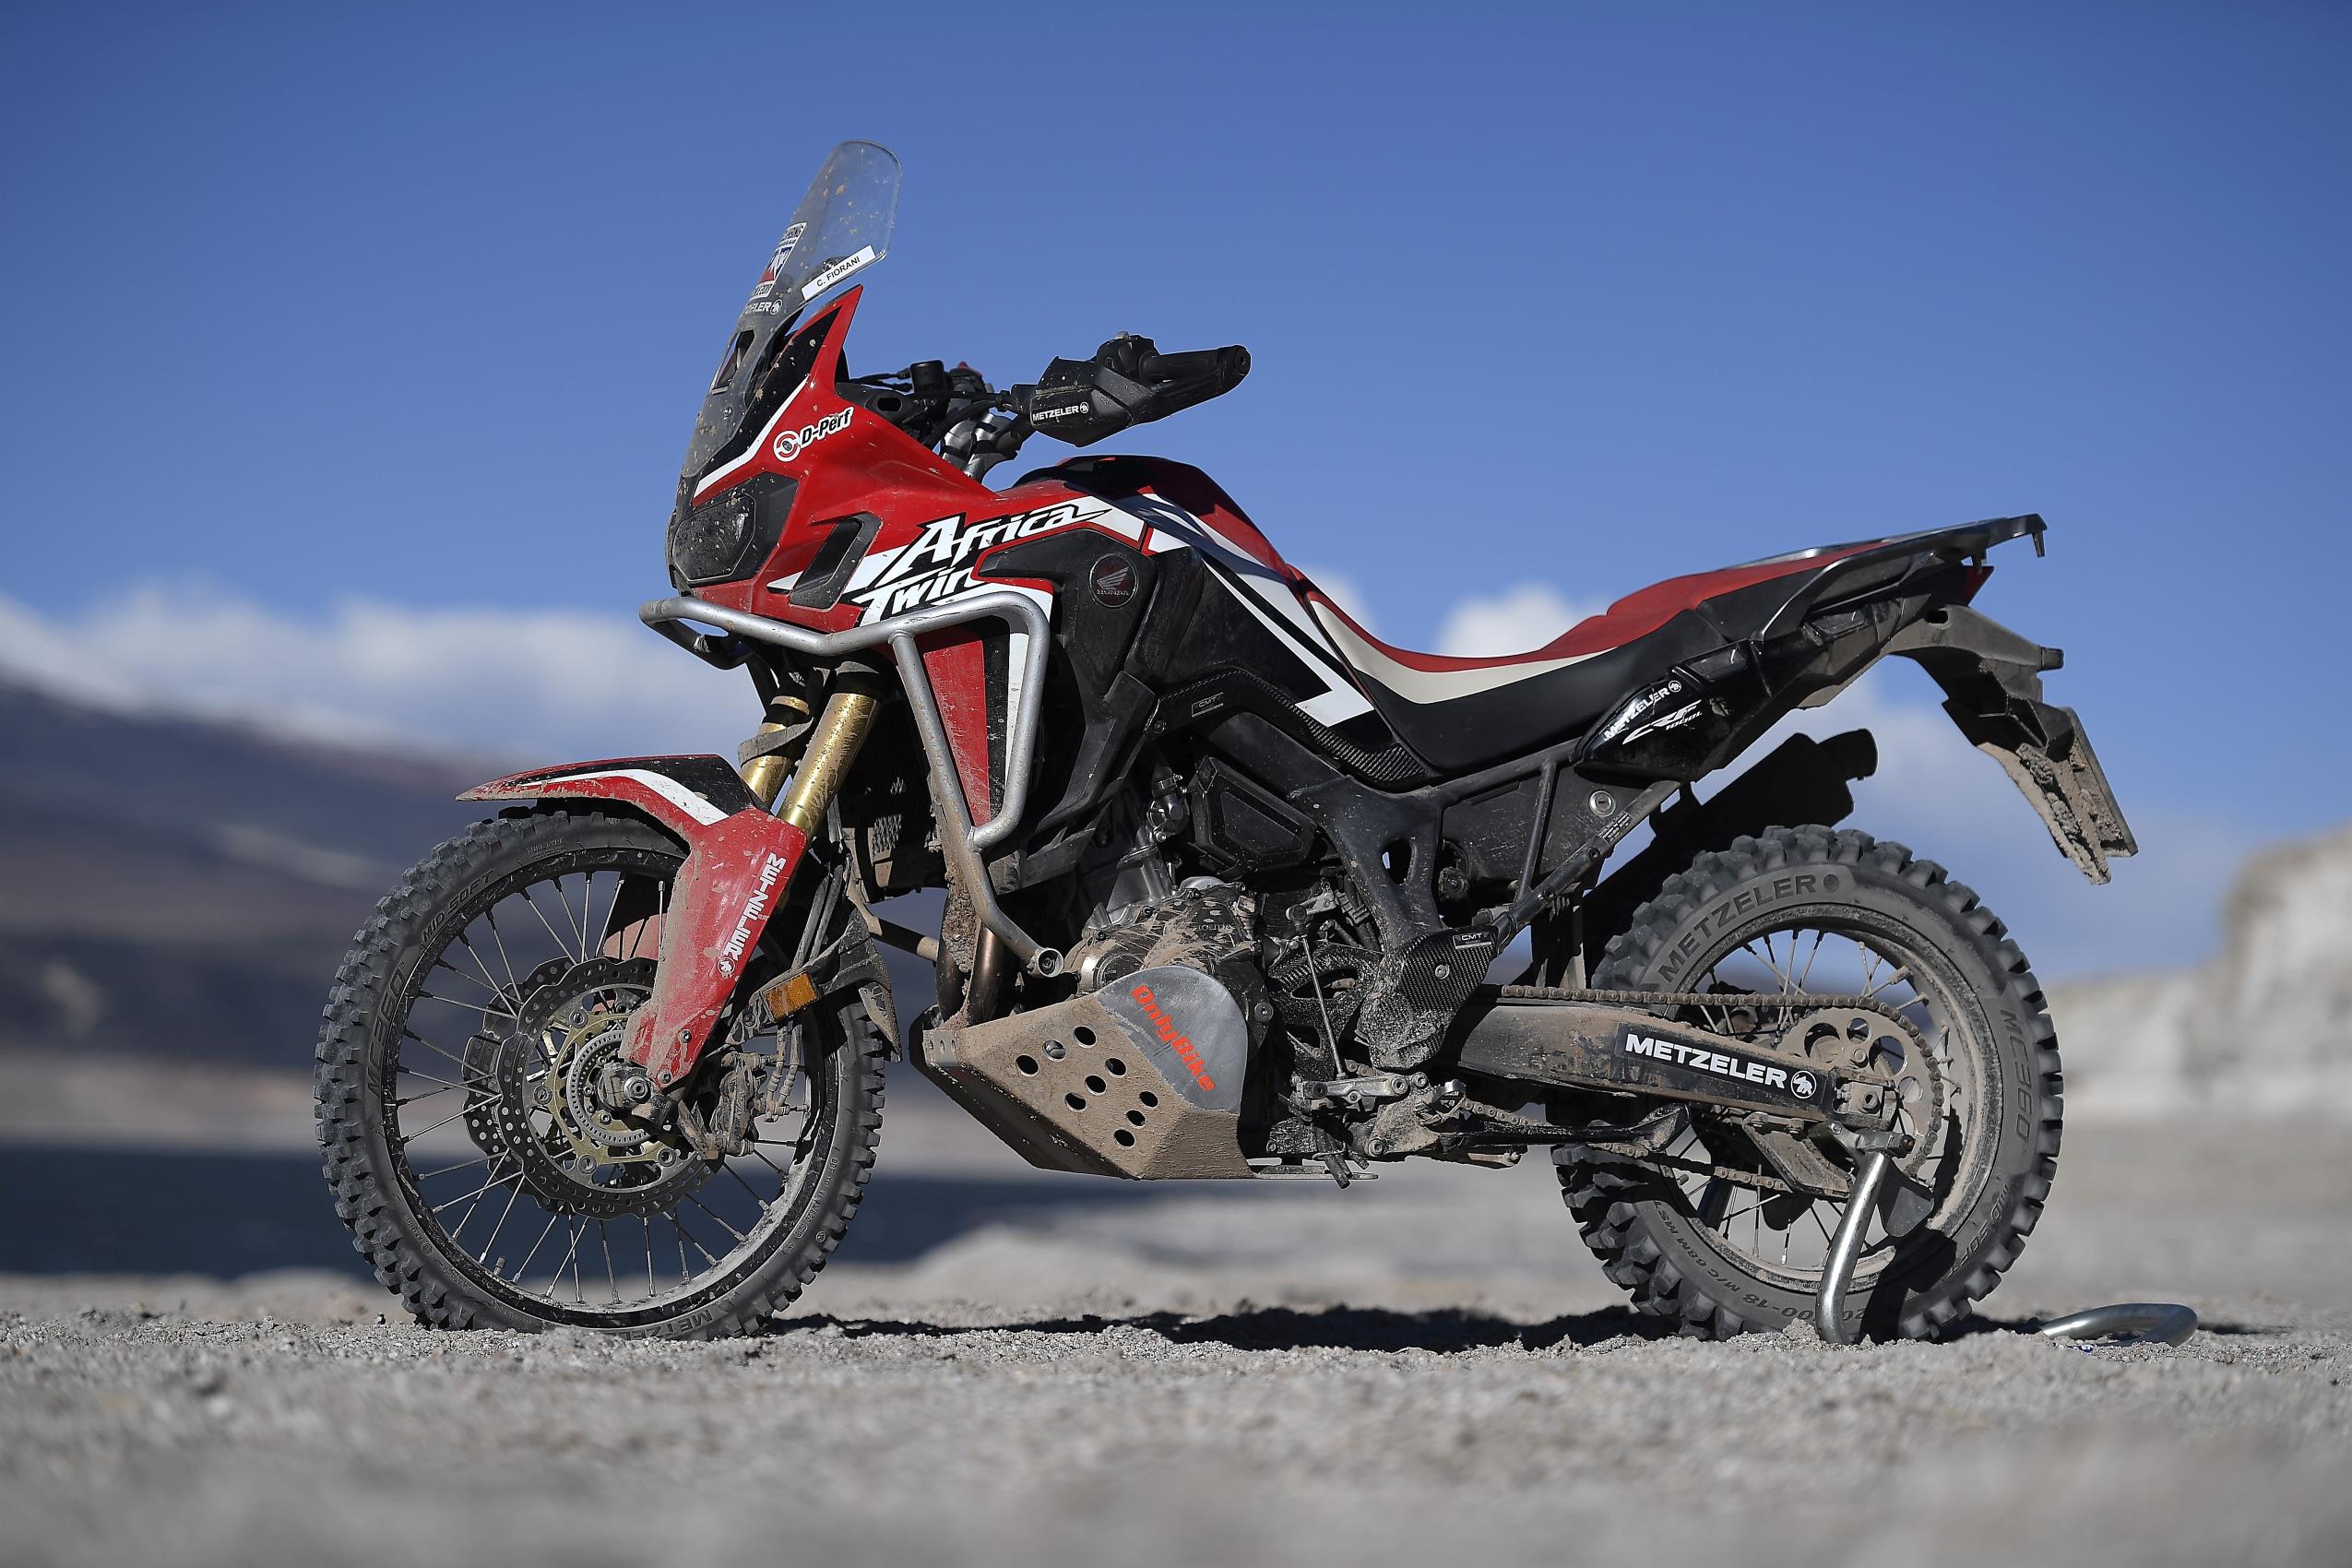 Honda Africa Twin Achieves The Impossible